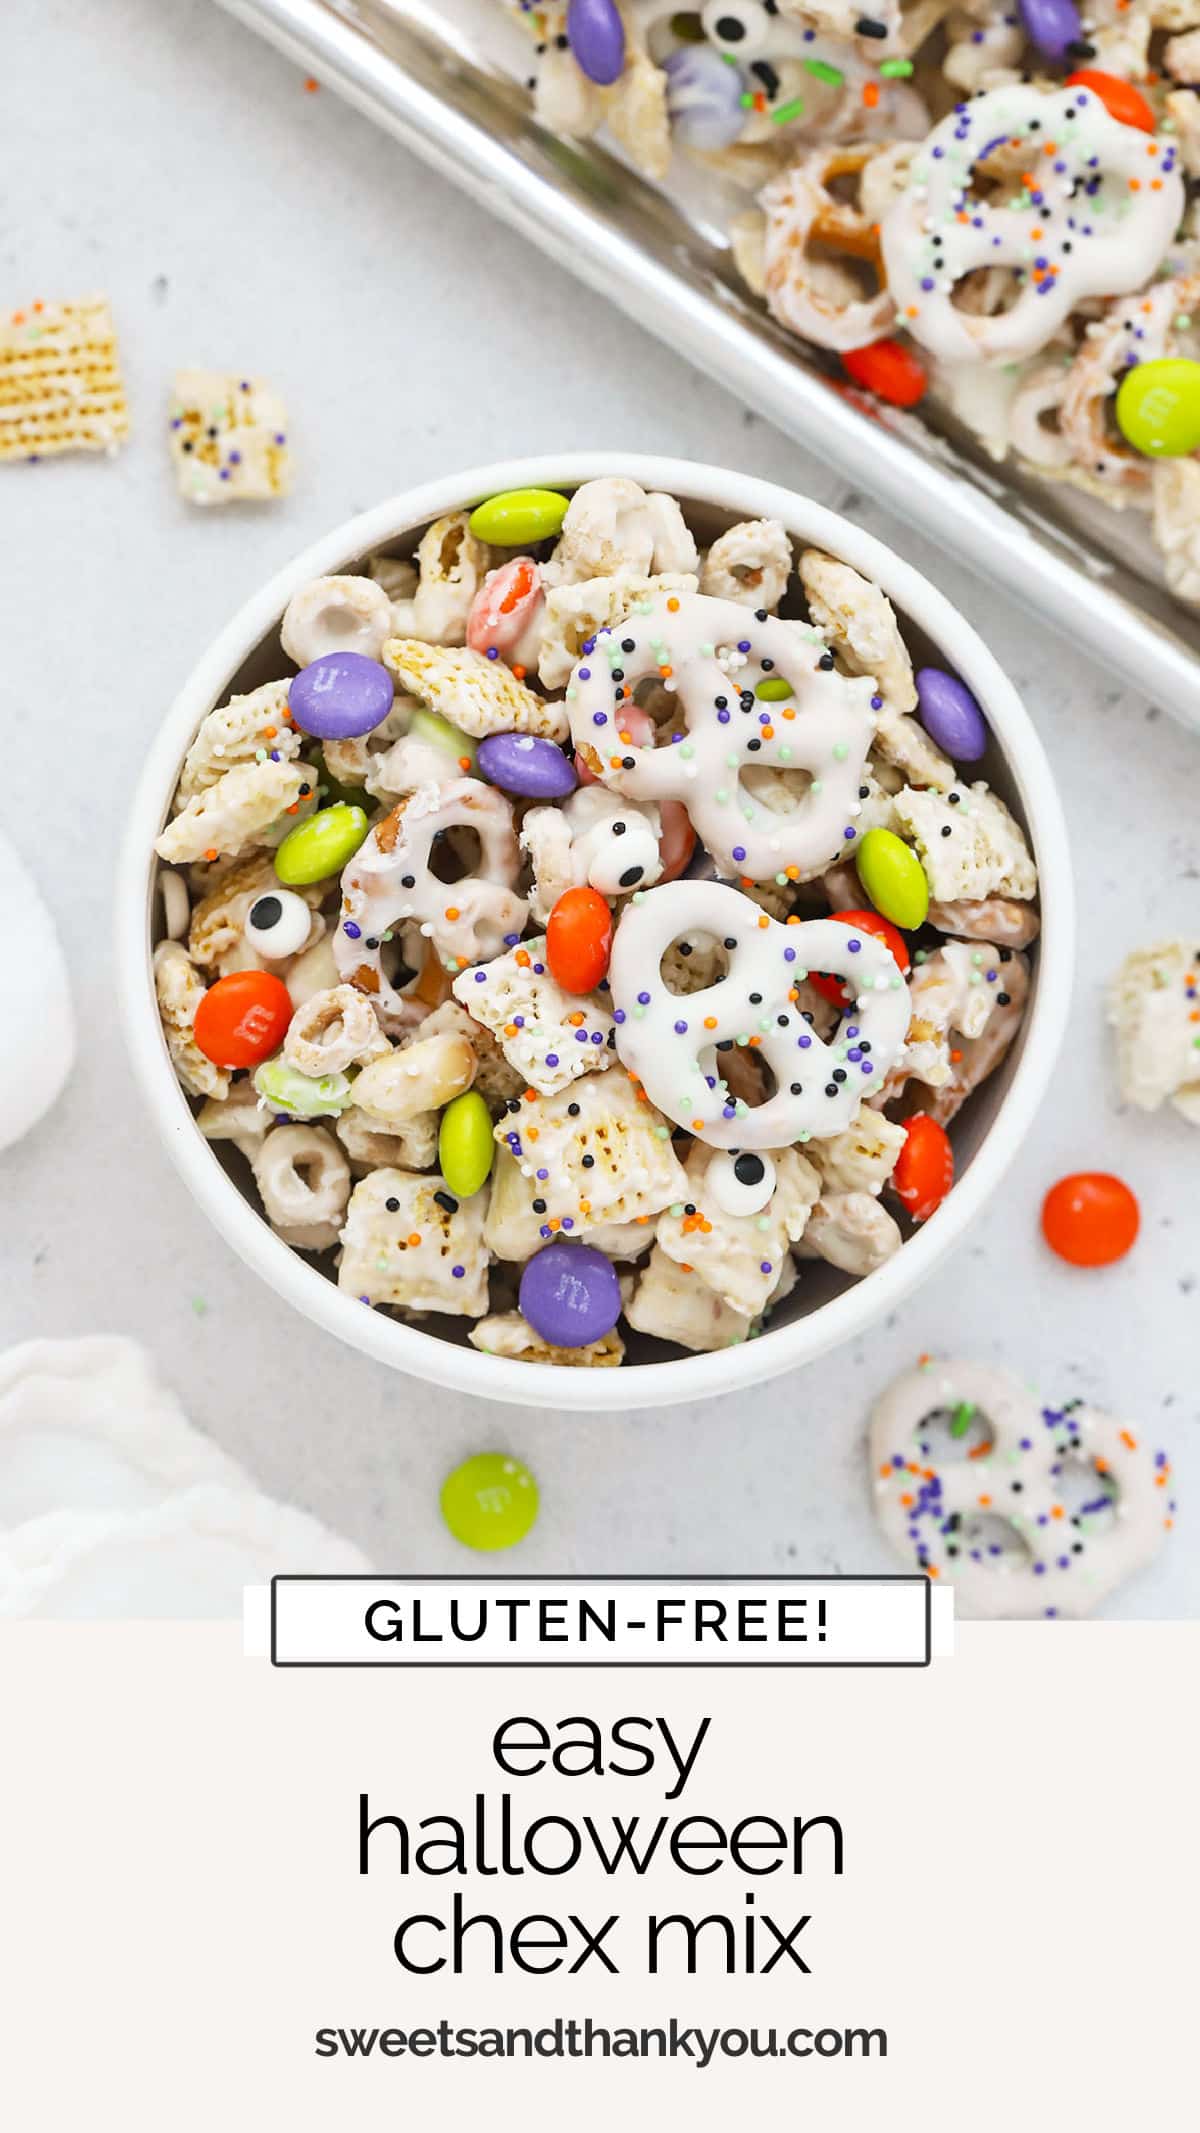 This crispy, crunchy Halloween Chex Mix is perfect for spooky season! Don't miss all the yummy mix-ins for this Halloween snack mix below. / gluten-free Halloween snack mix / gluten-free Halloween snack / gluten-free Halloween dessert / gluten-free halloween chex mix / gluten-free Halloween treat / fall snack mix recipe / fall chex mix recipe